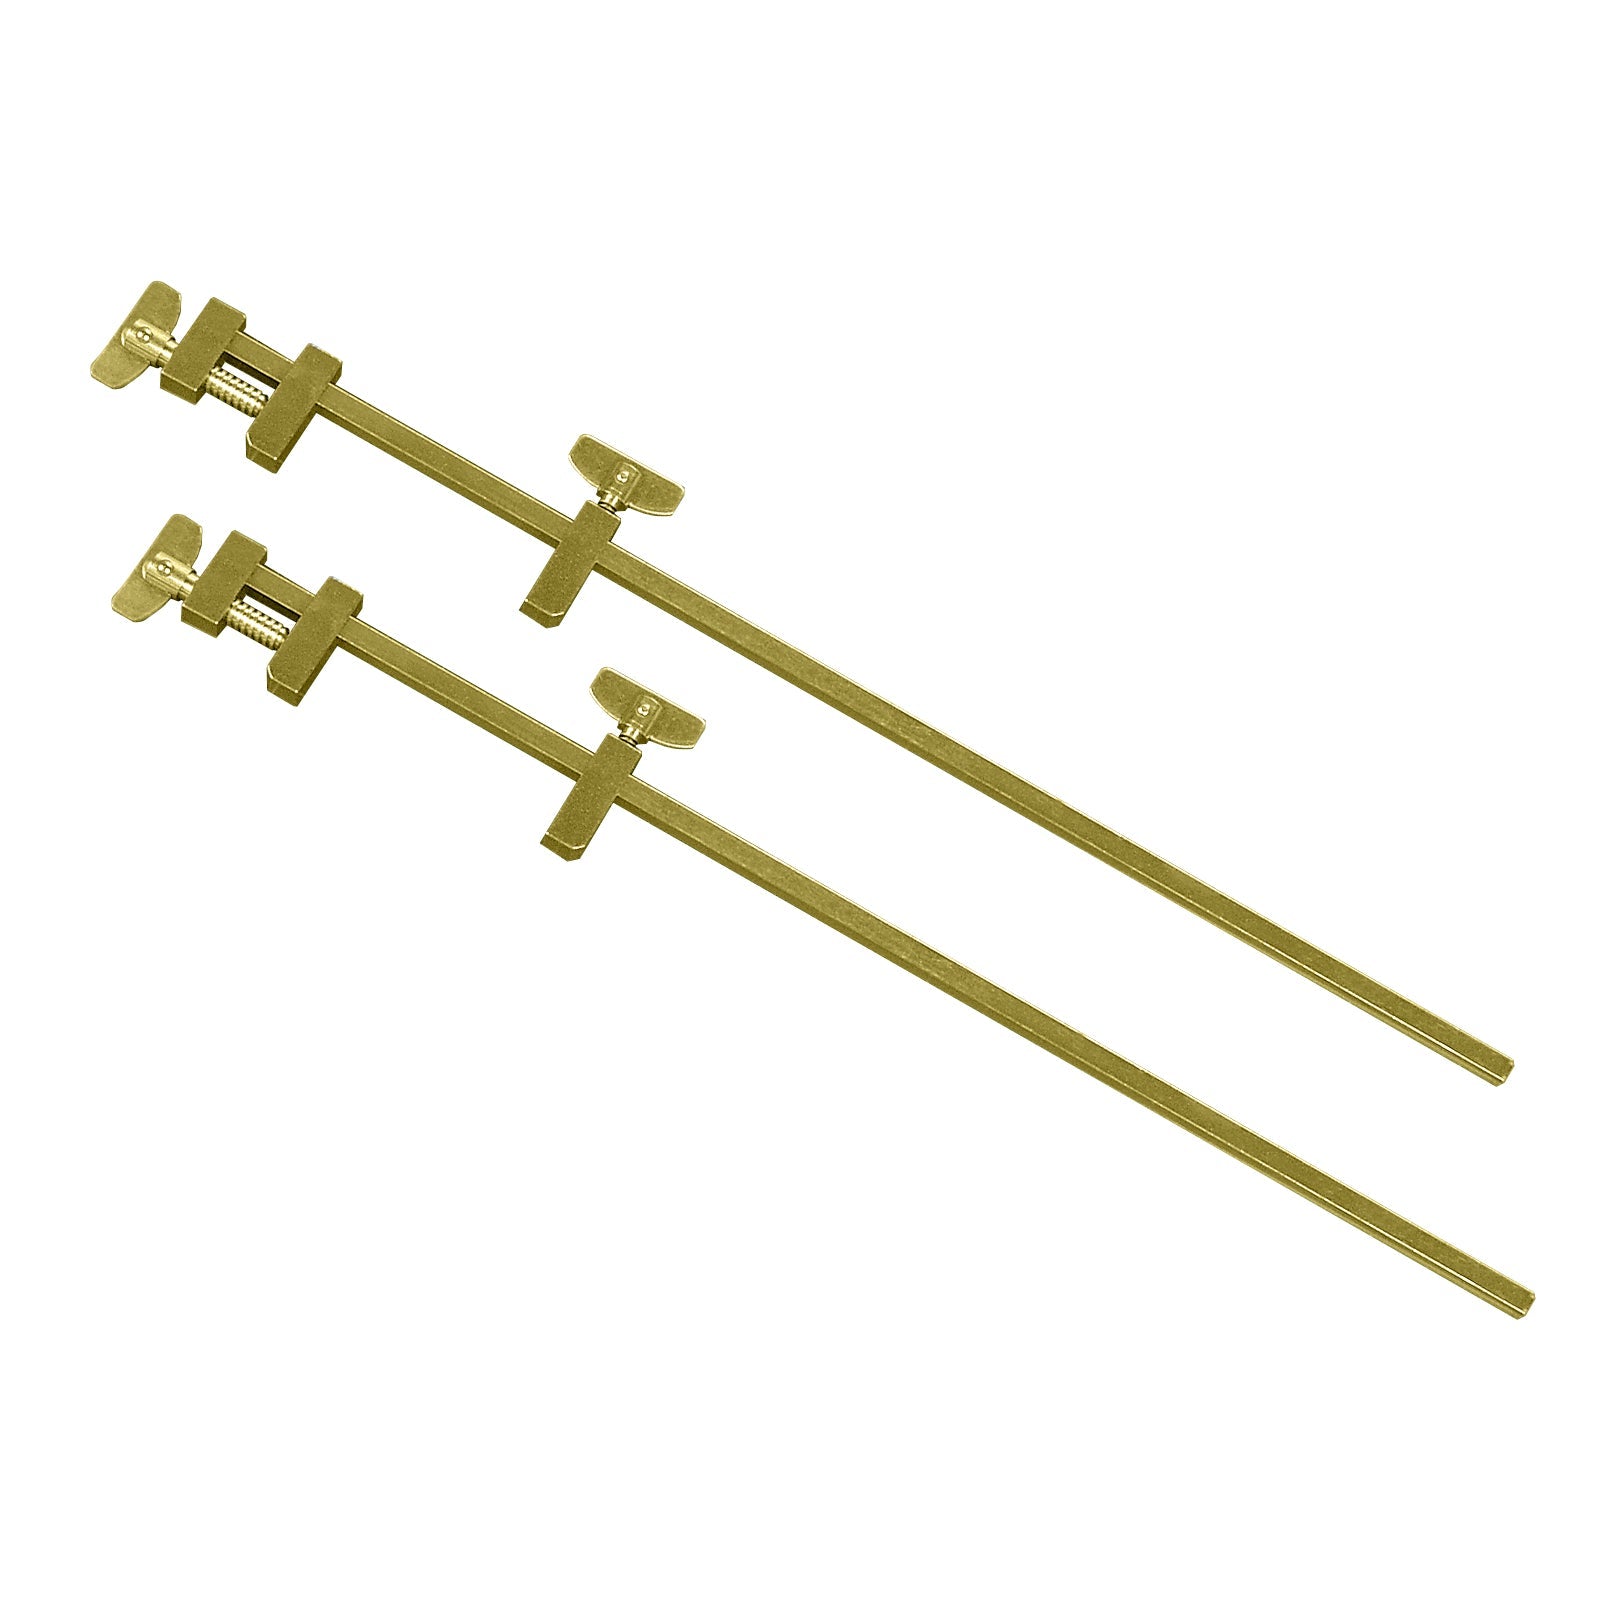 Solid Brass Miniature Bar Clamps, 12 Inches Long (Set of 2) - Micro - Mark Tool Clamps & Vises